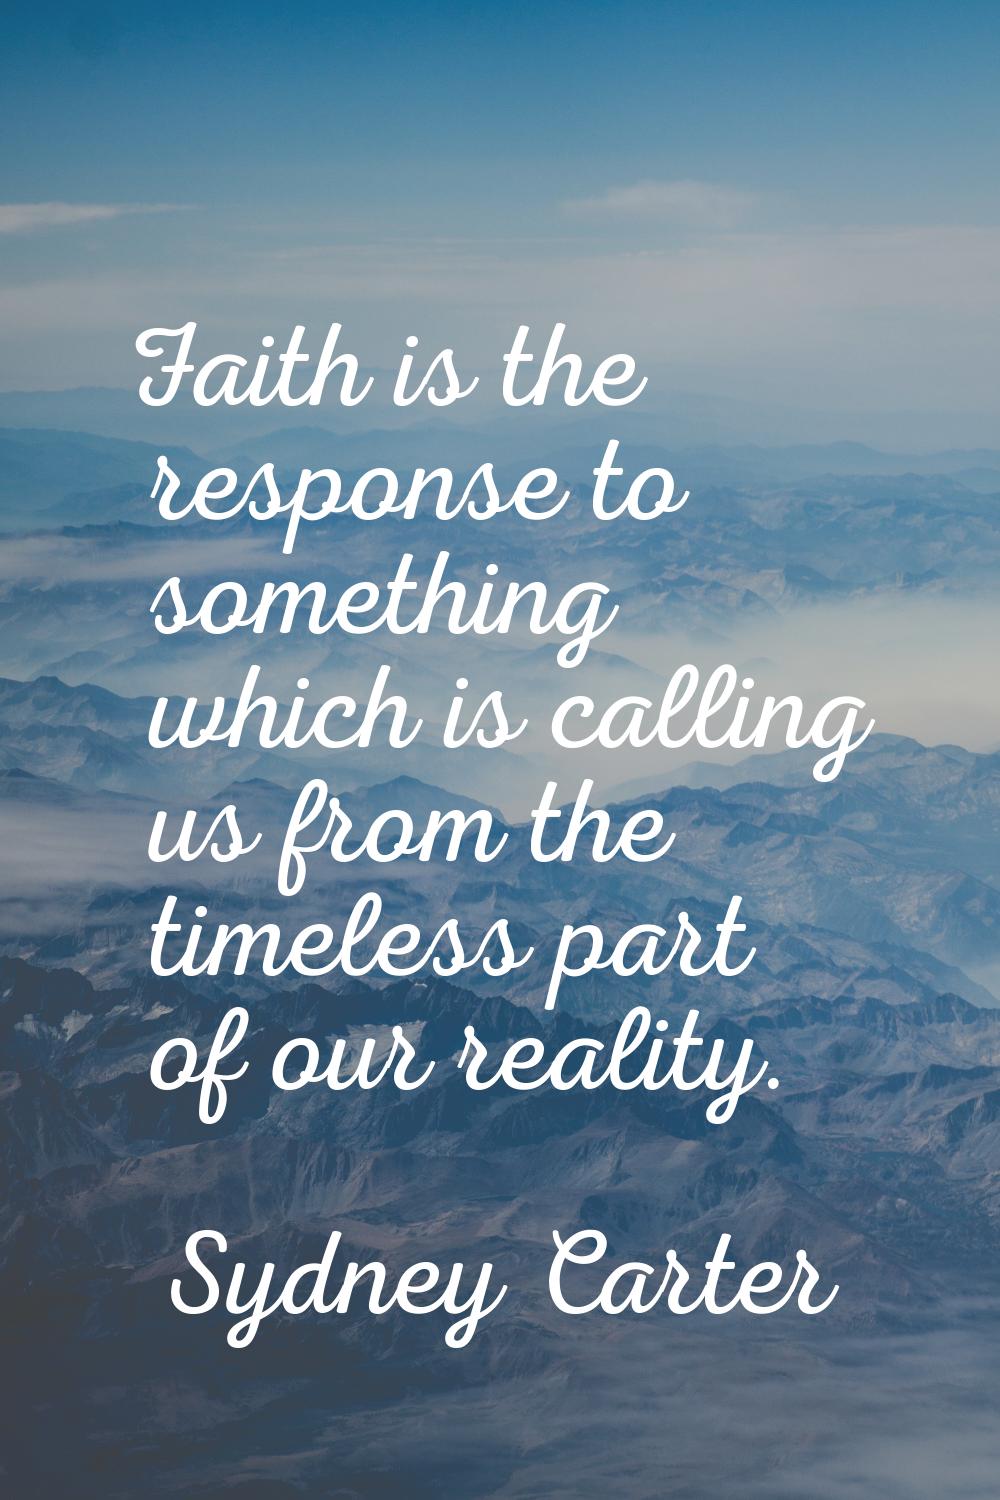 Faith is the response to something which is calling us from the timeless part of our reality.